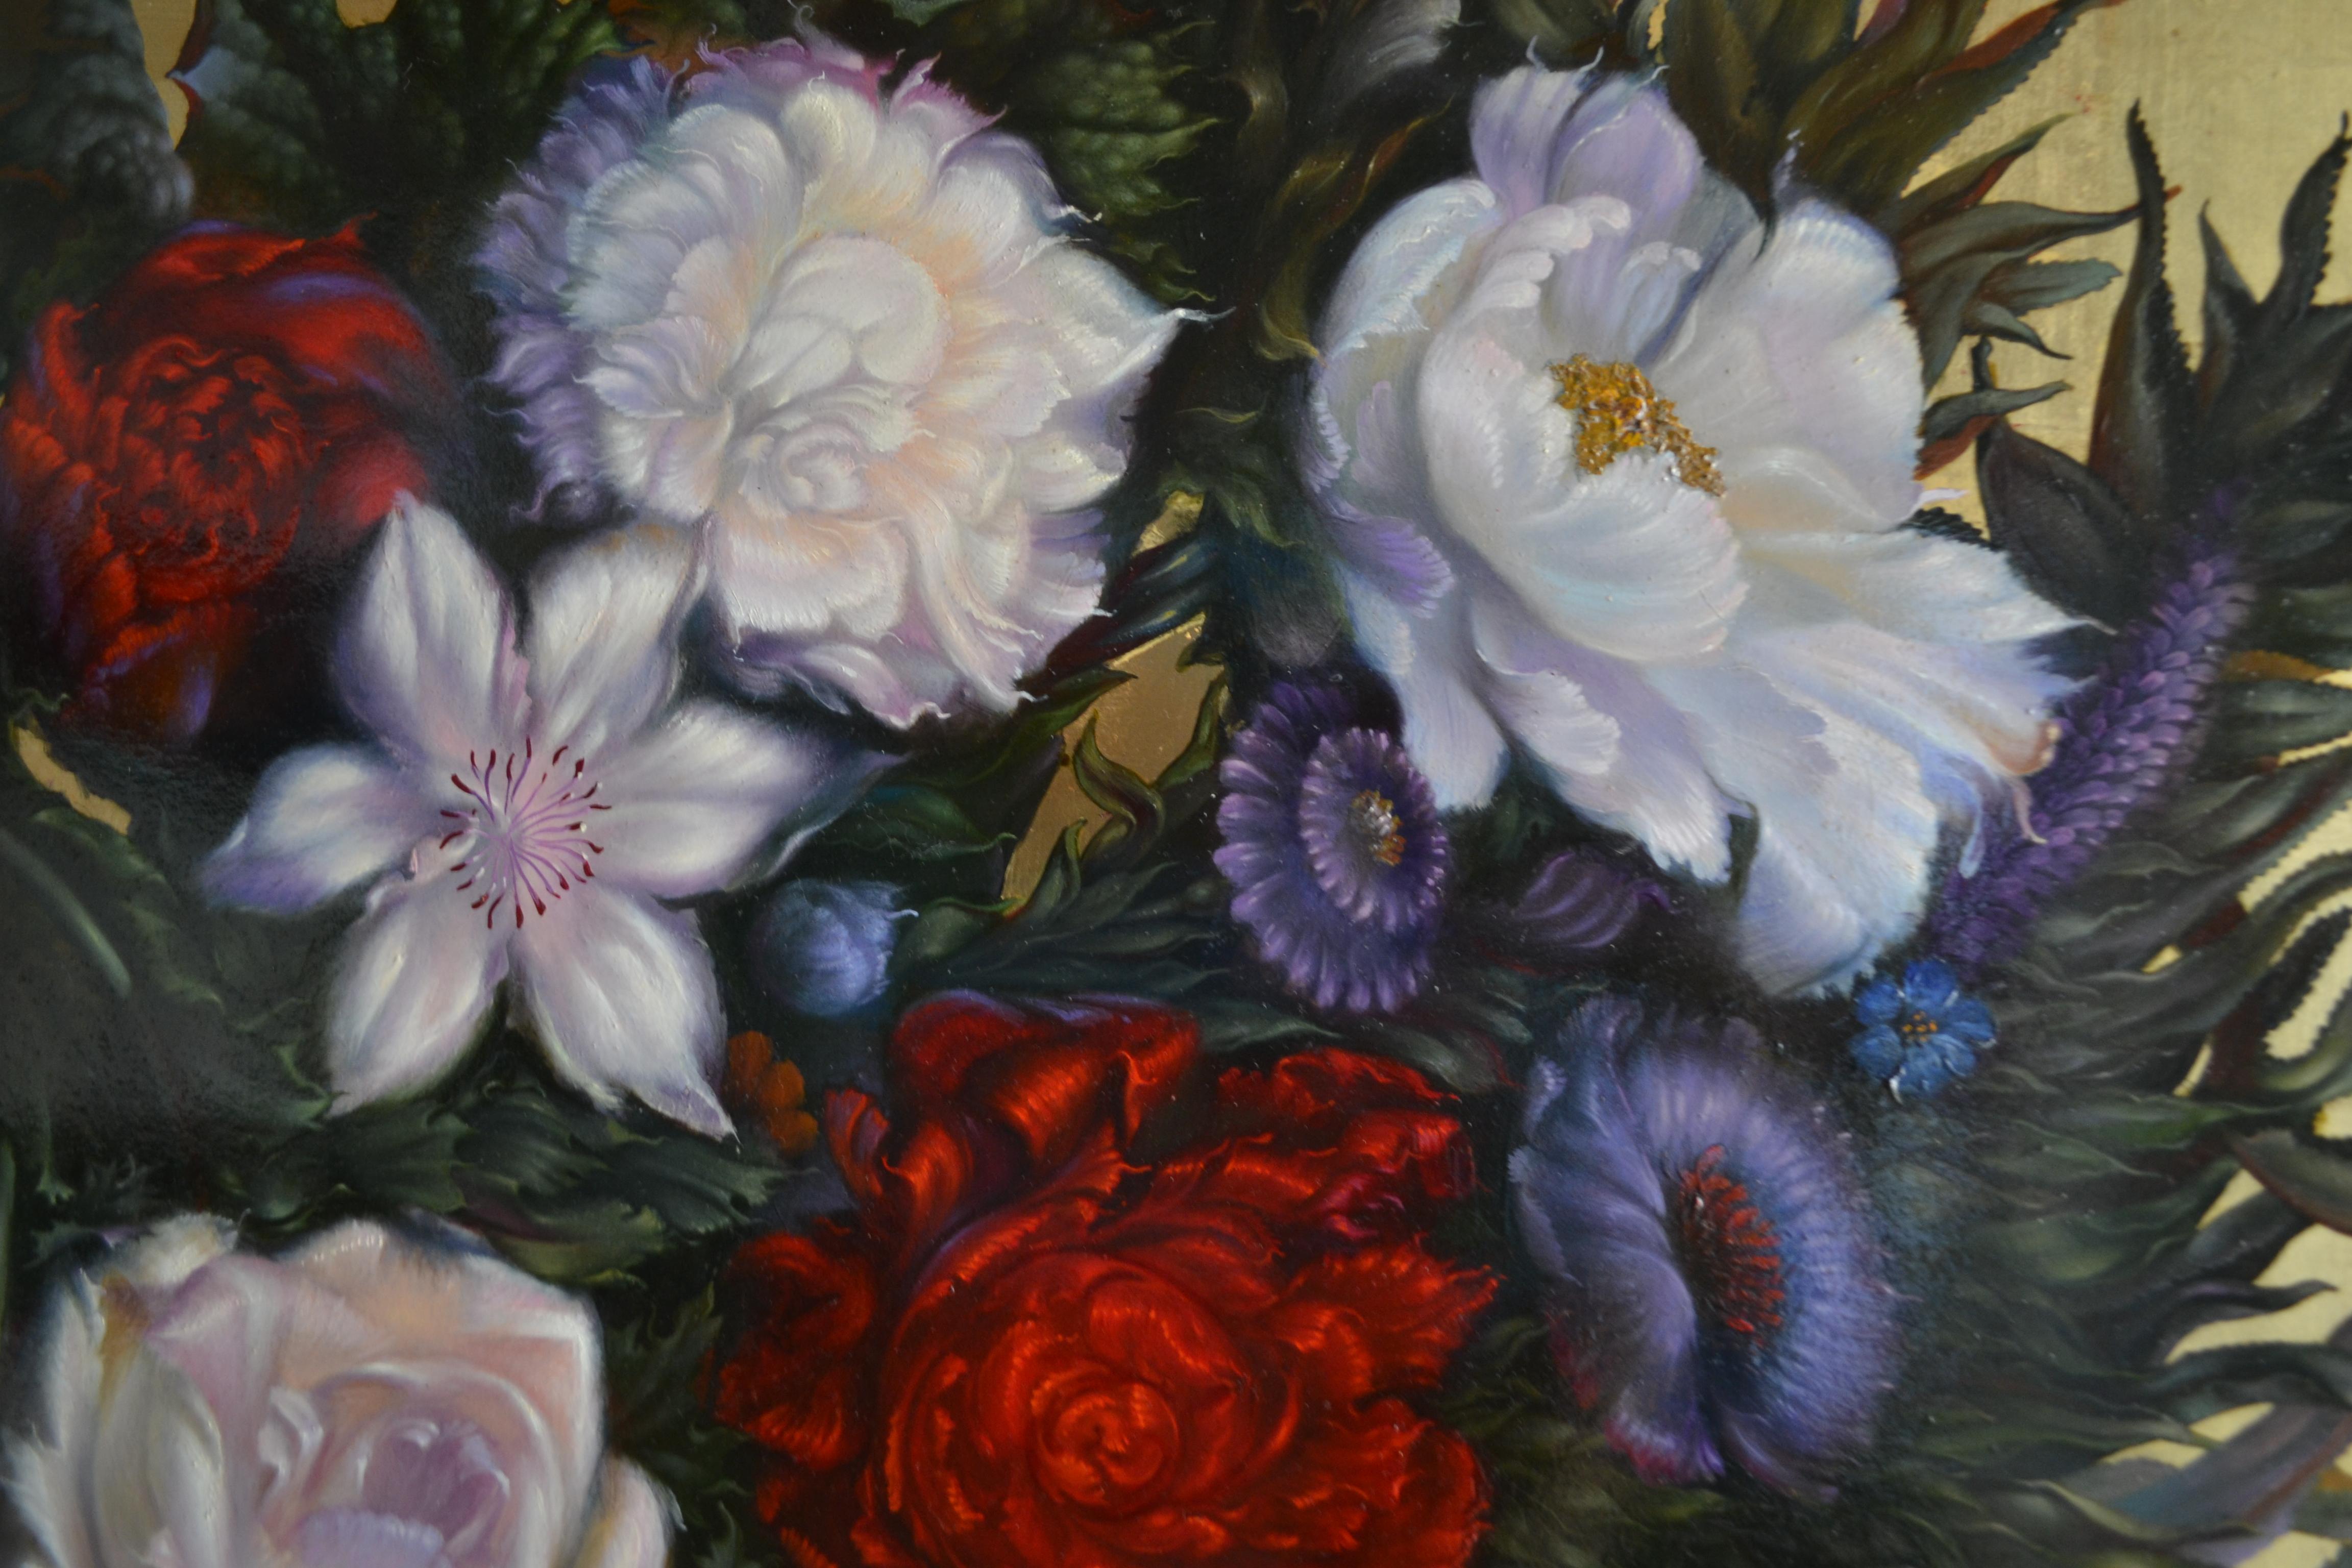 An exceptional still life in the Renaissance style of a silky bouquet of flowers held in a Canada Dry can painted on a gold leaf background by Georgian Canadian artist George Elbakidze. The Canvas is titles Canada Dry 1. The artist signed his